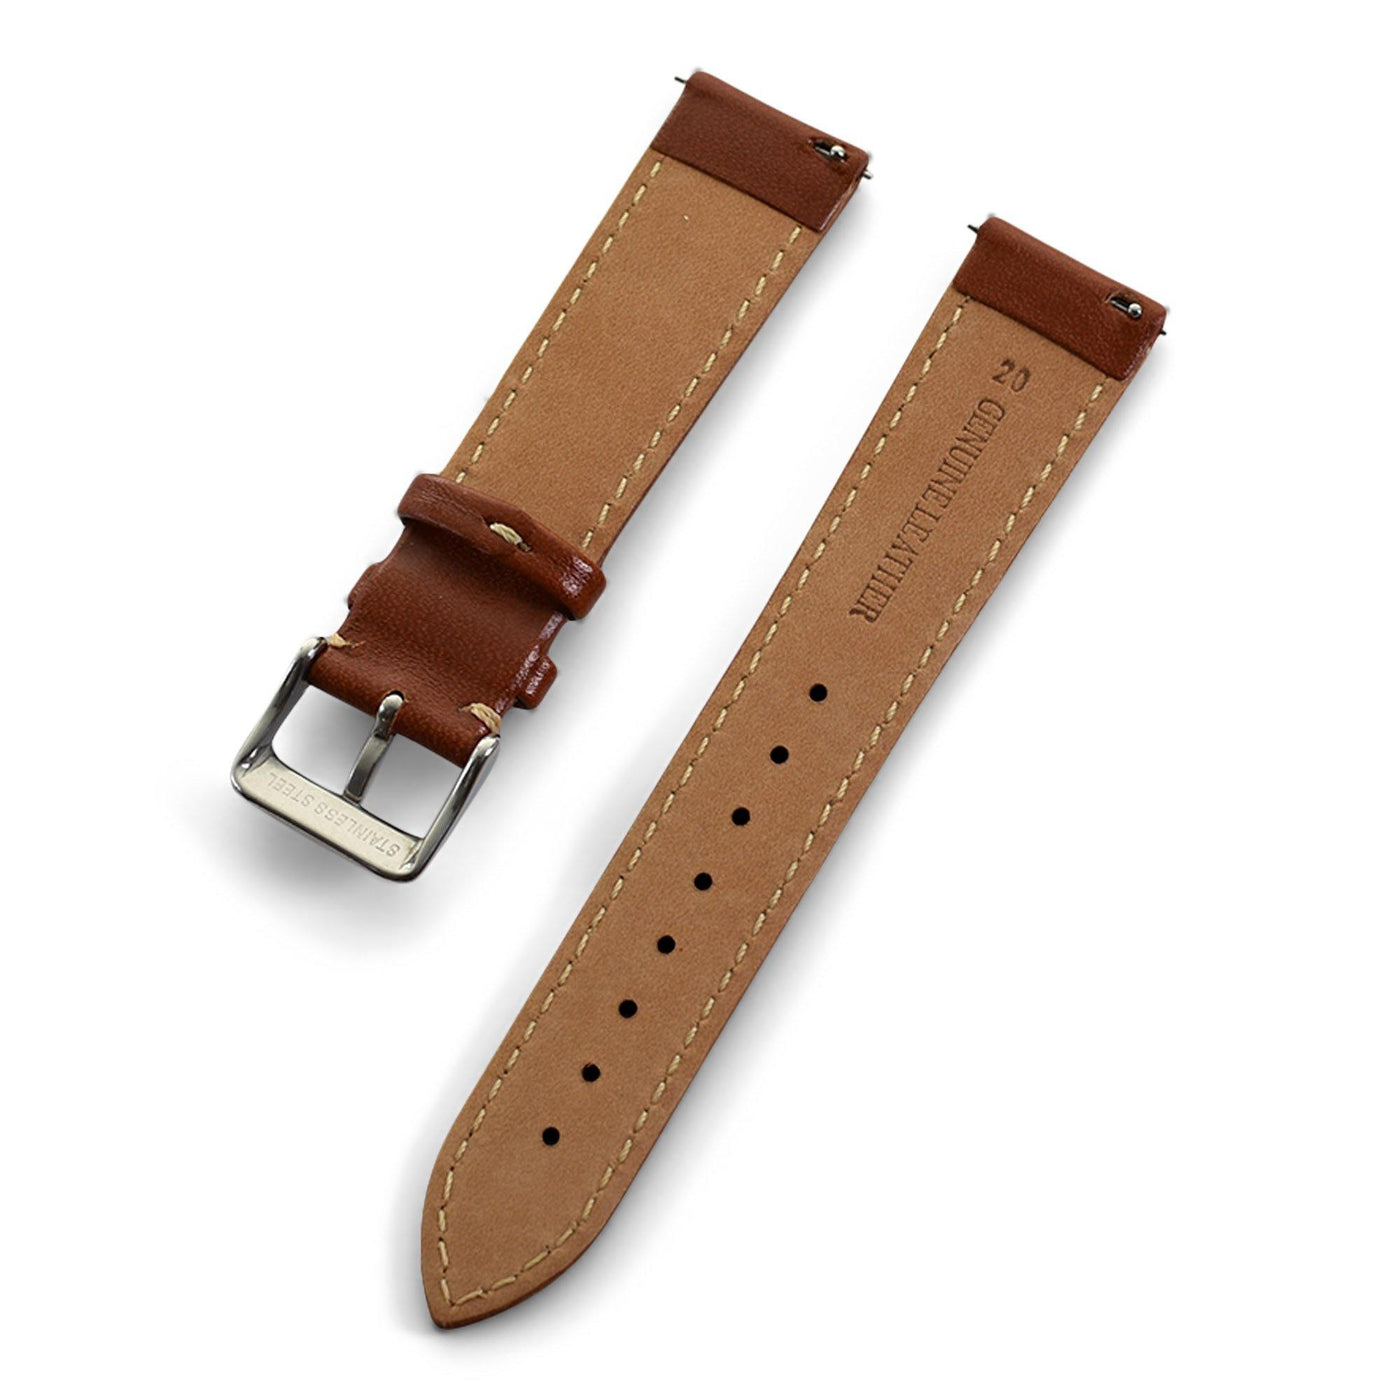 THE CHELSEA QUICK RELEASE LIGHT BROWN - The Sydney Strap Co.